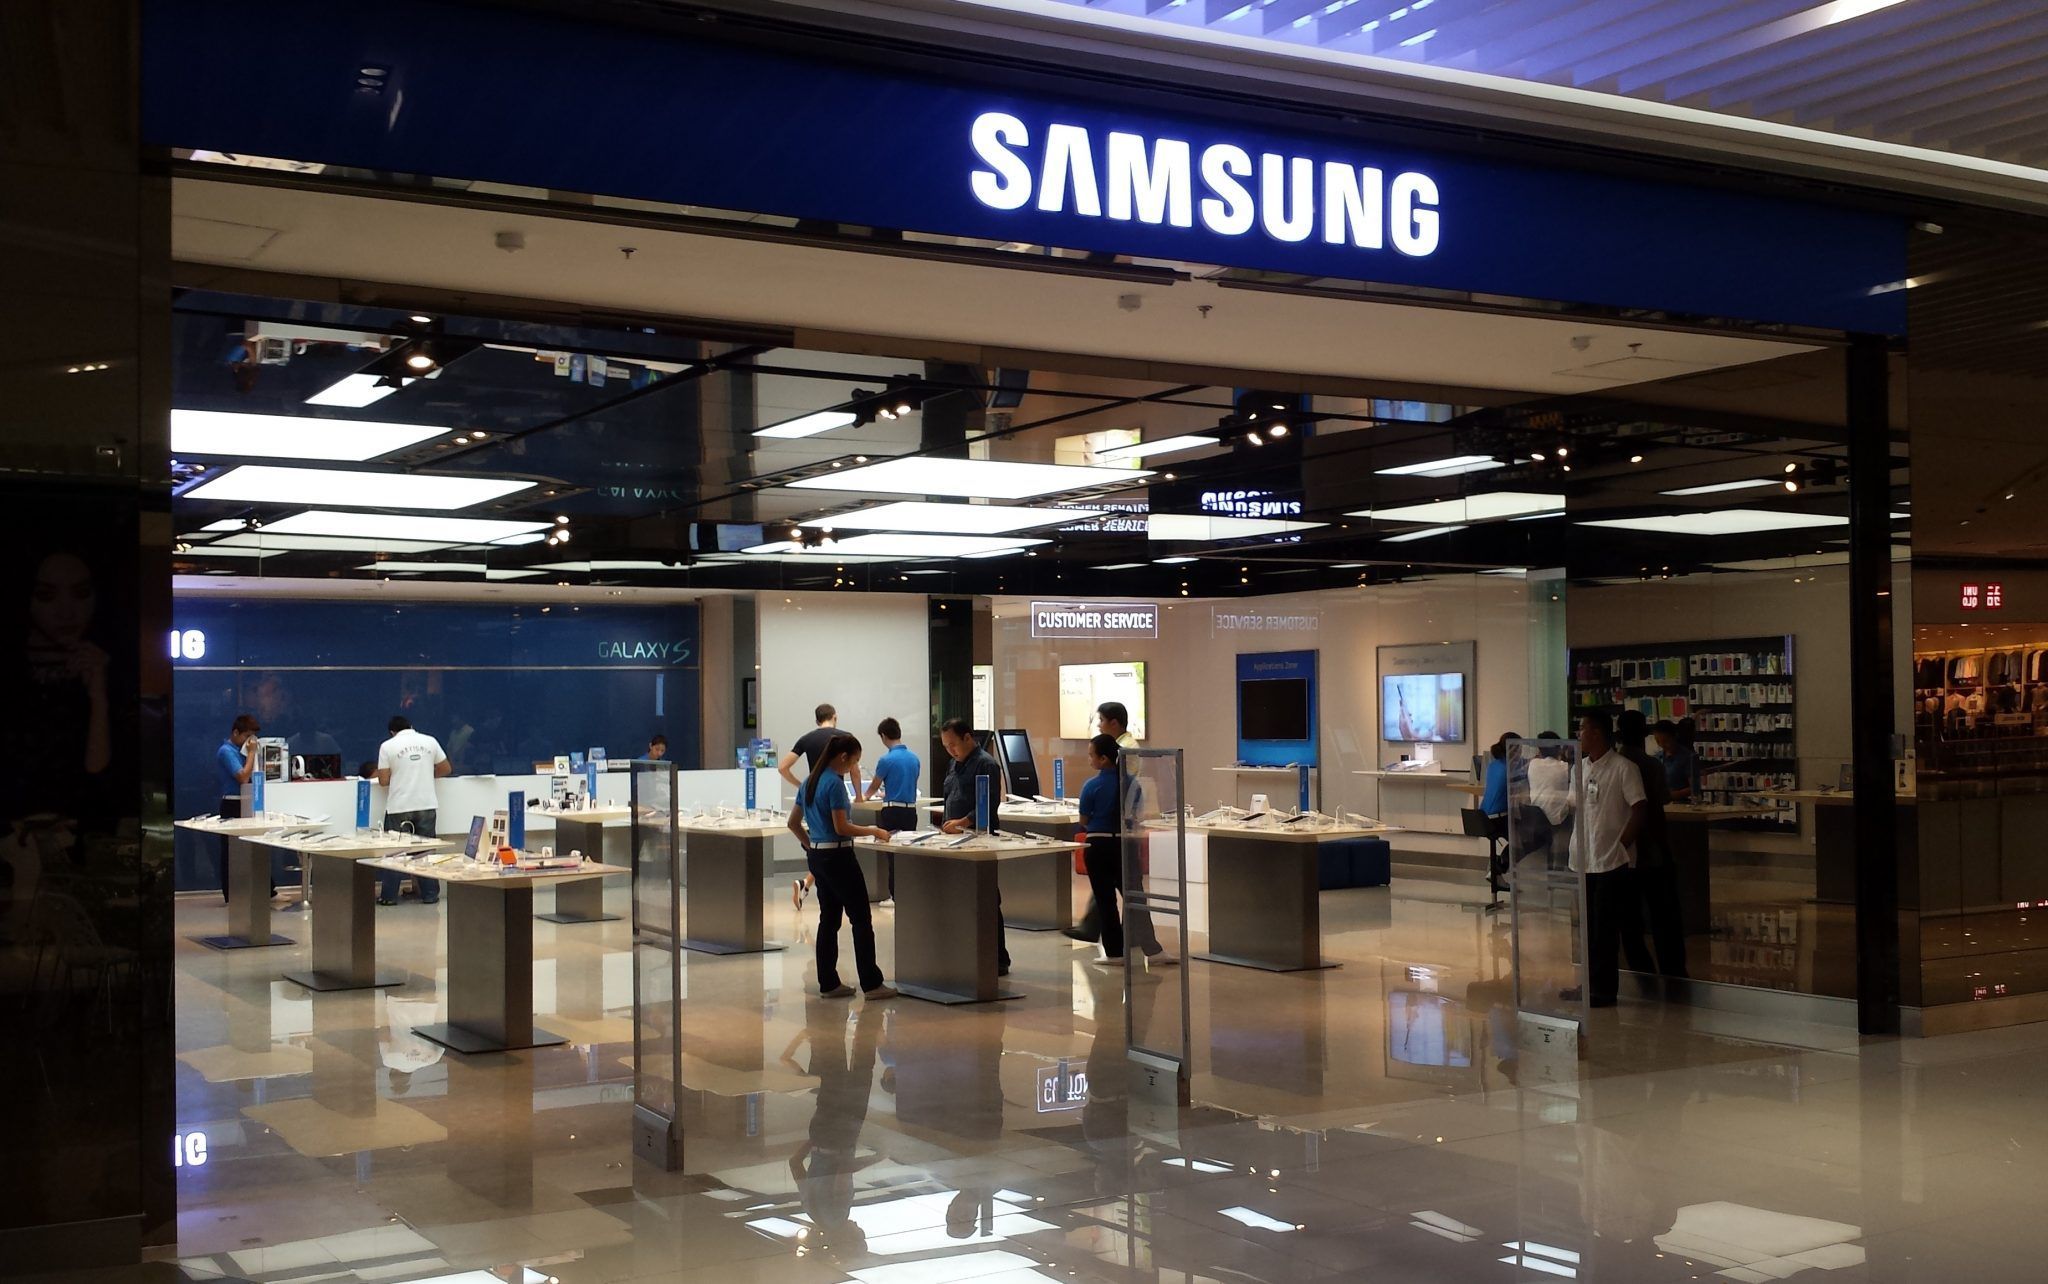 Samsung will let you take their premium smartphone by paying Rs 1 5